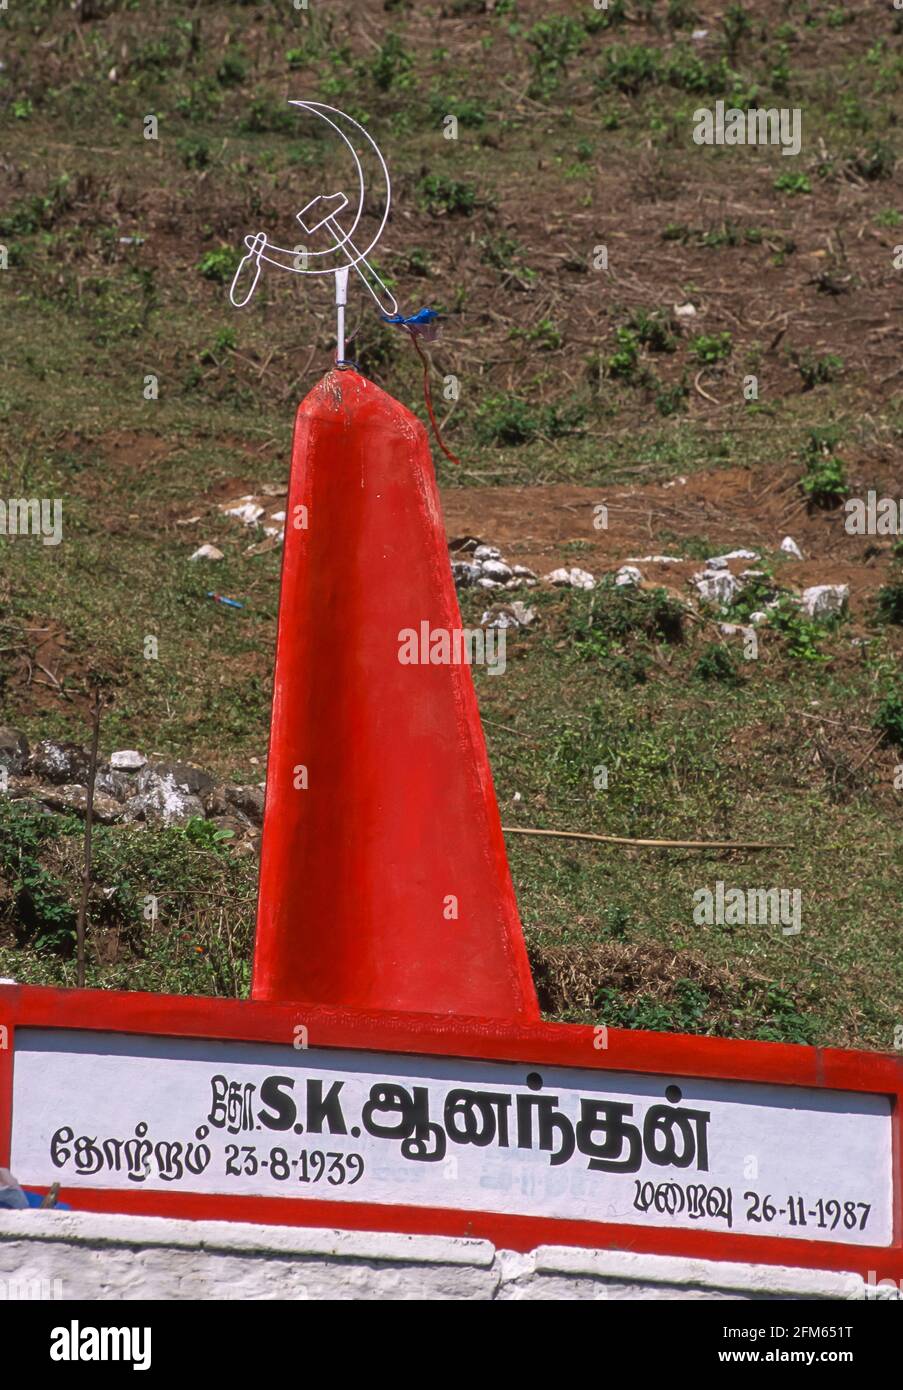 KERALA, INDIA - Marxism monument with hammer and sickle, in the Western Ghats mountains near Peermade. Stock Photo